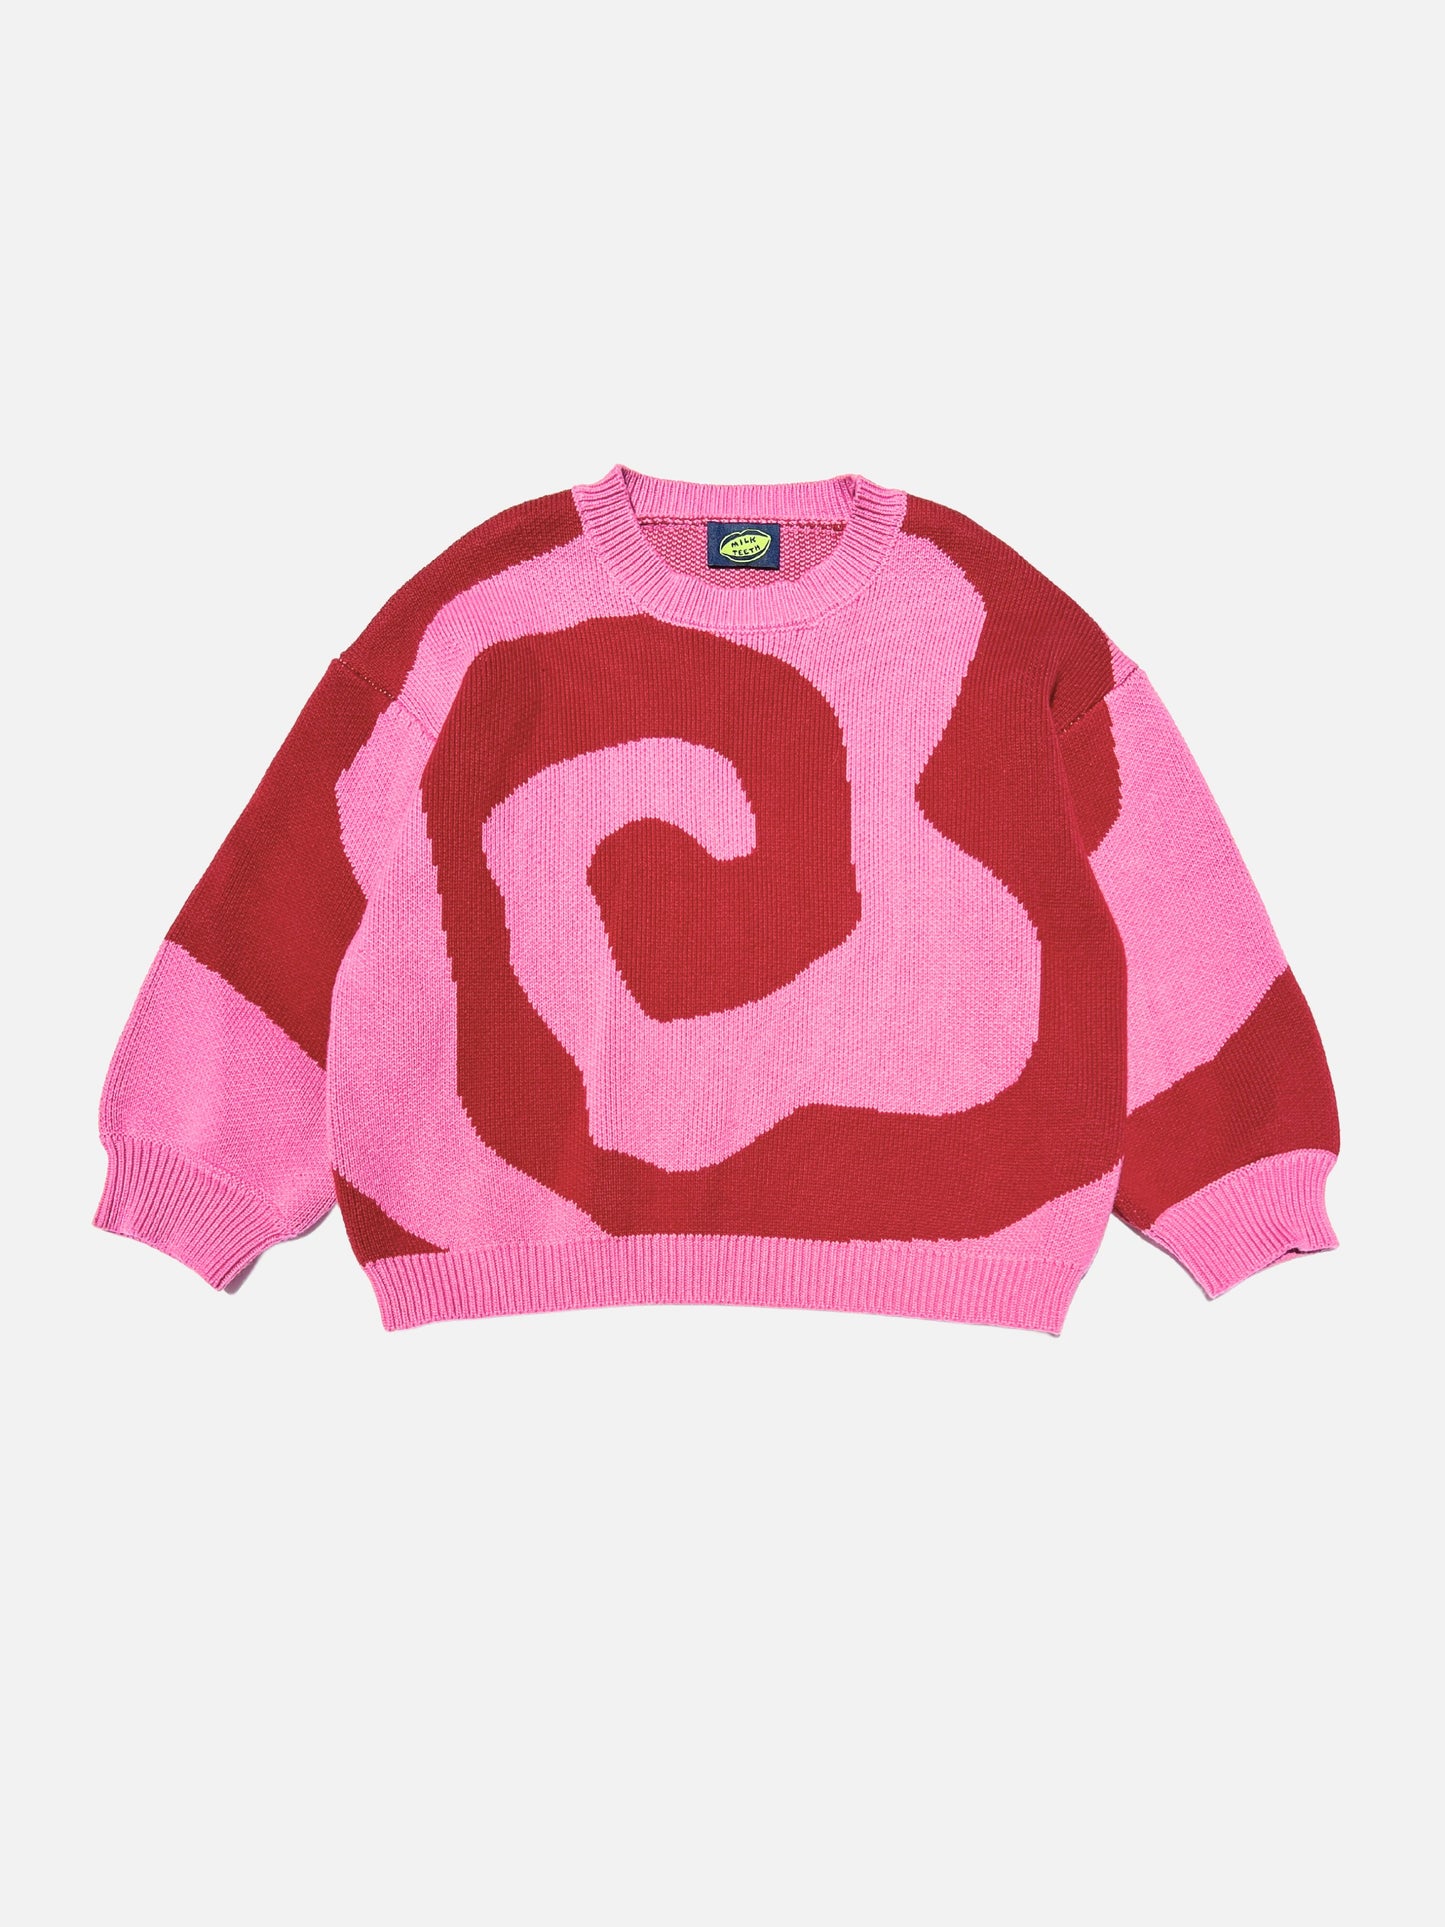 Raspberry | Front view of kids crewneck sweater in bright pink, with a large single red swirl design that covers the entire sweater.